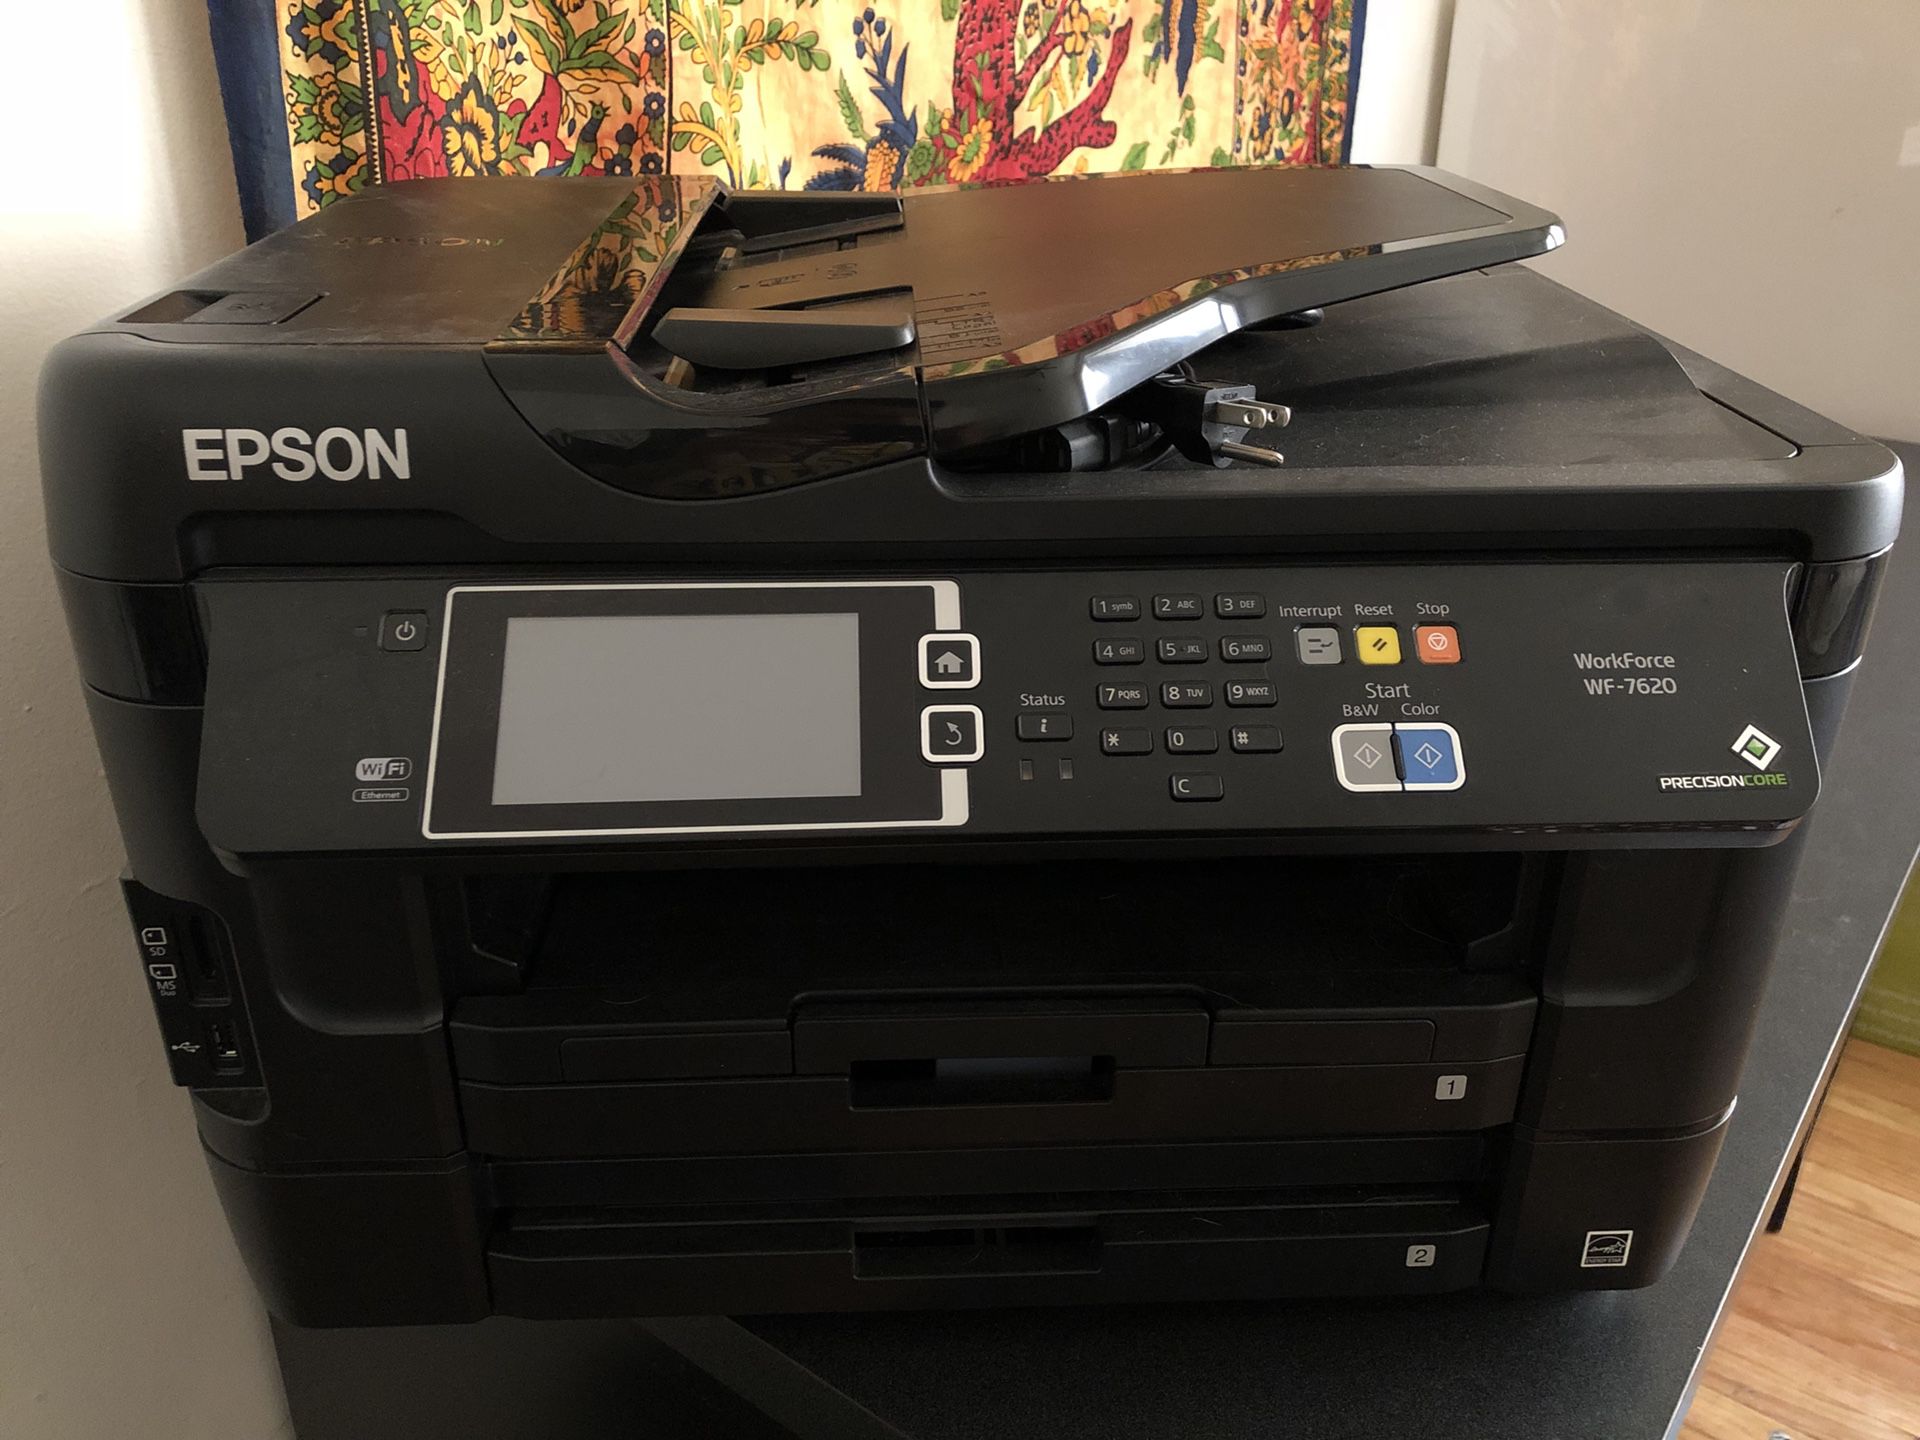 Epson Workforce 7620 All-in-One Office Printer